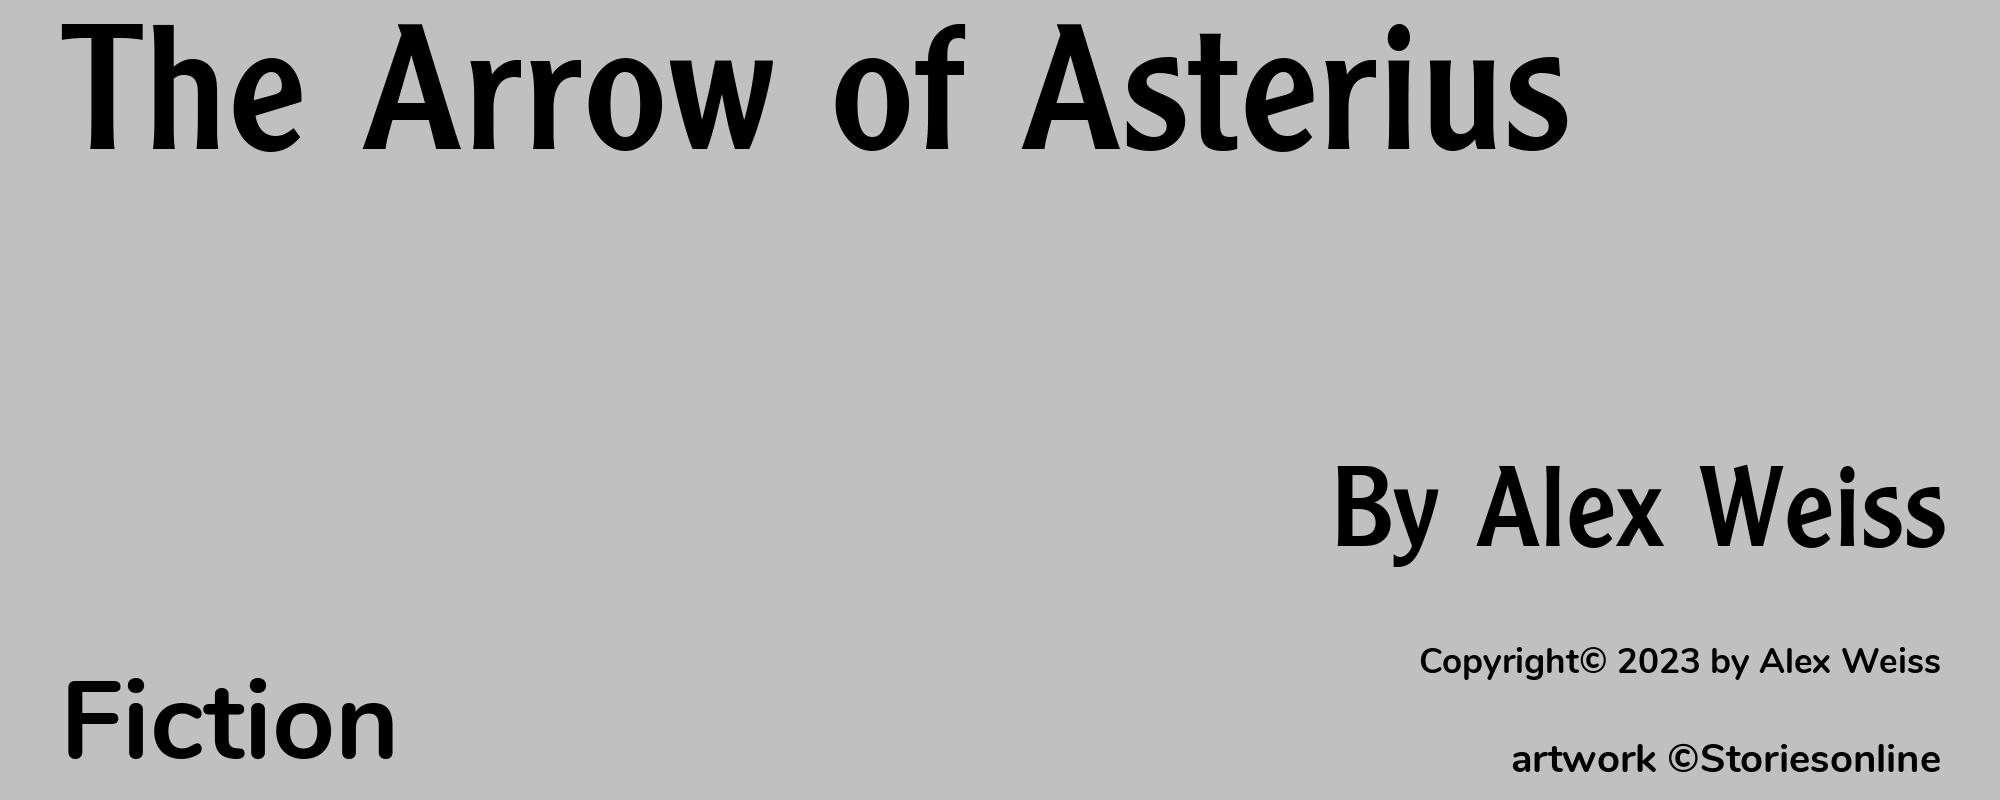 The Arrow of Asterius - Cover